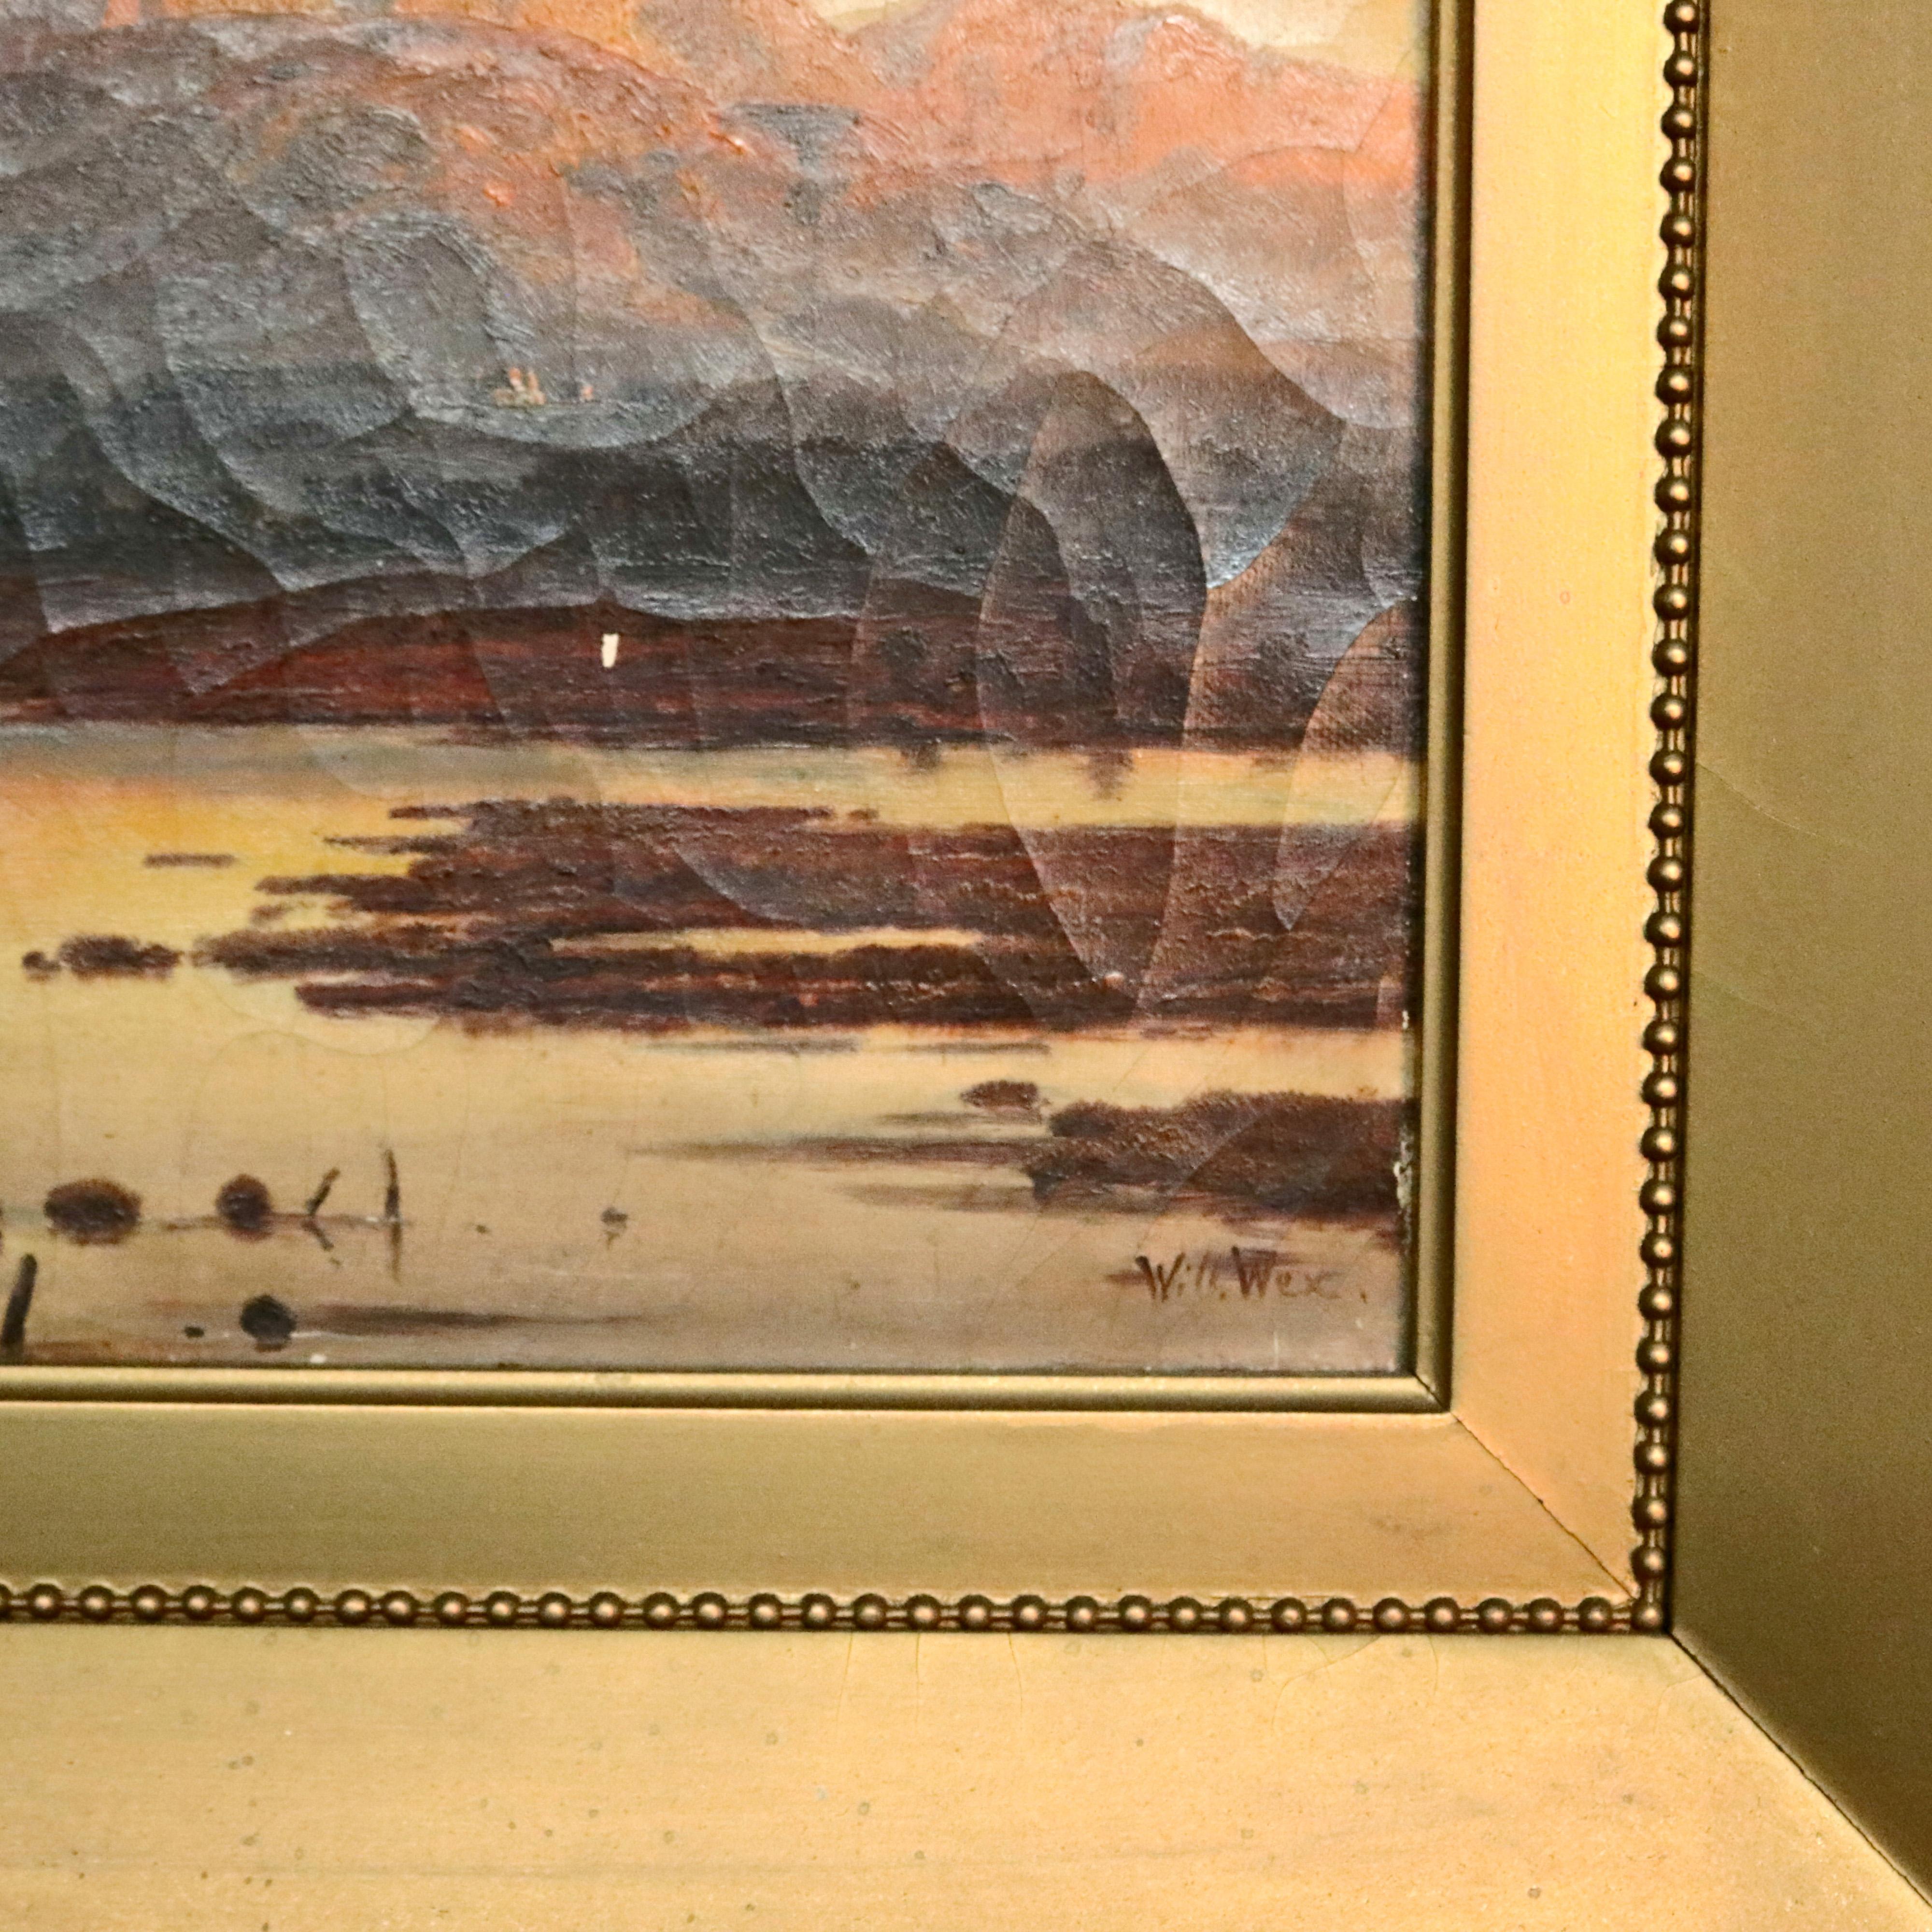 Hand-Painted Antique German Oil on Canvas Western Landscape by Will Wex, circa 1900